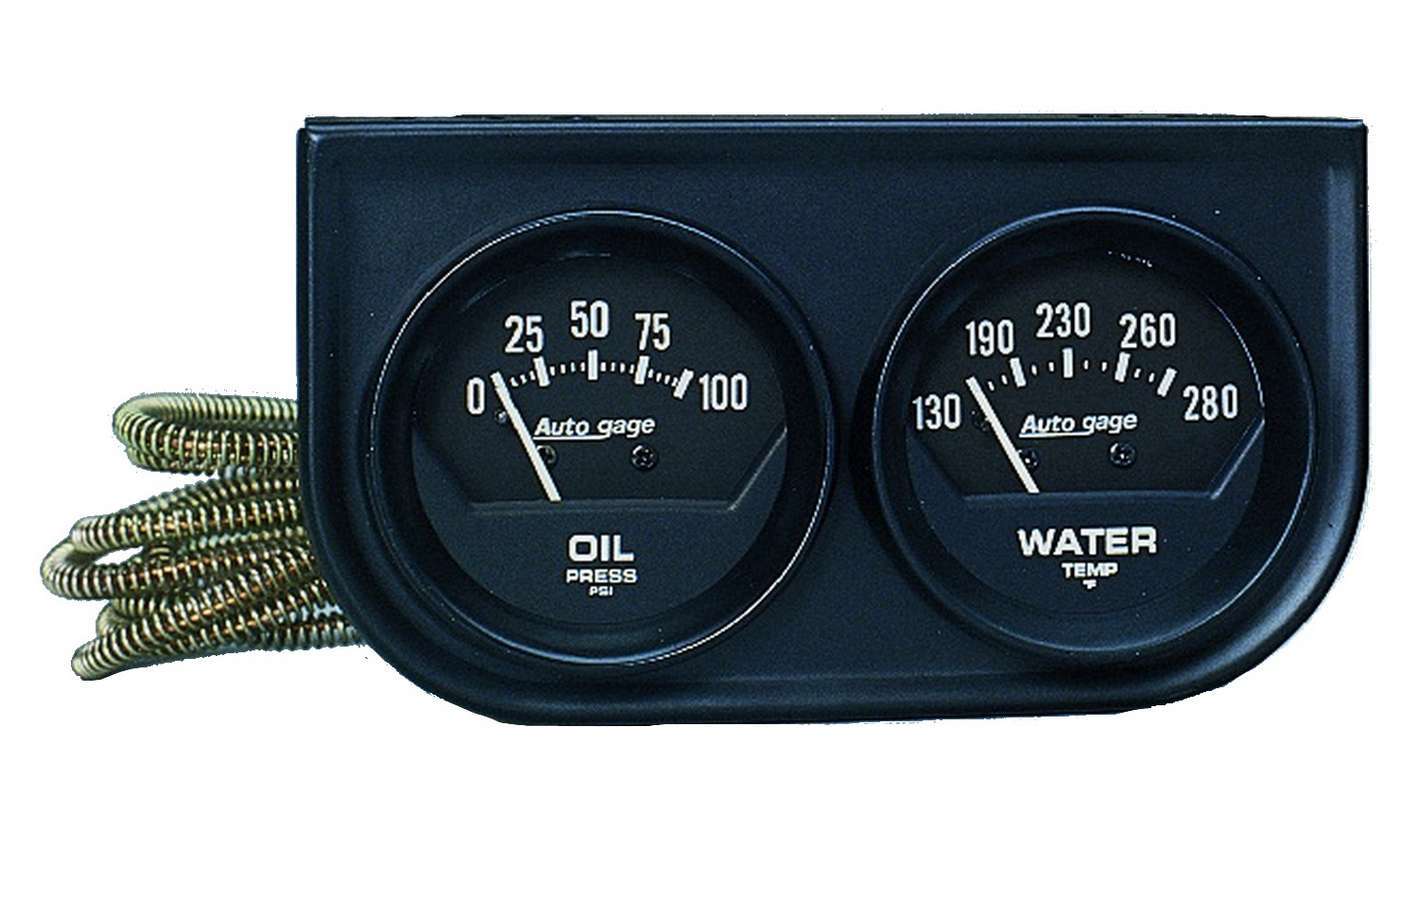 Auto Meter Gauge Panel Assembly, Auto Gage, Analog, Oil Pressure/Water Temperature, Black Face, Kit